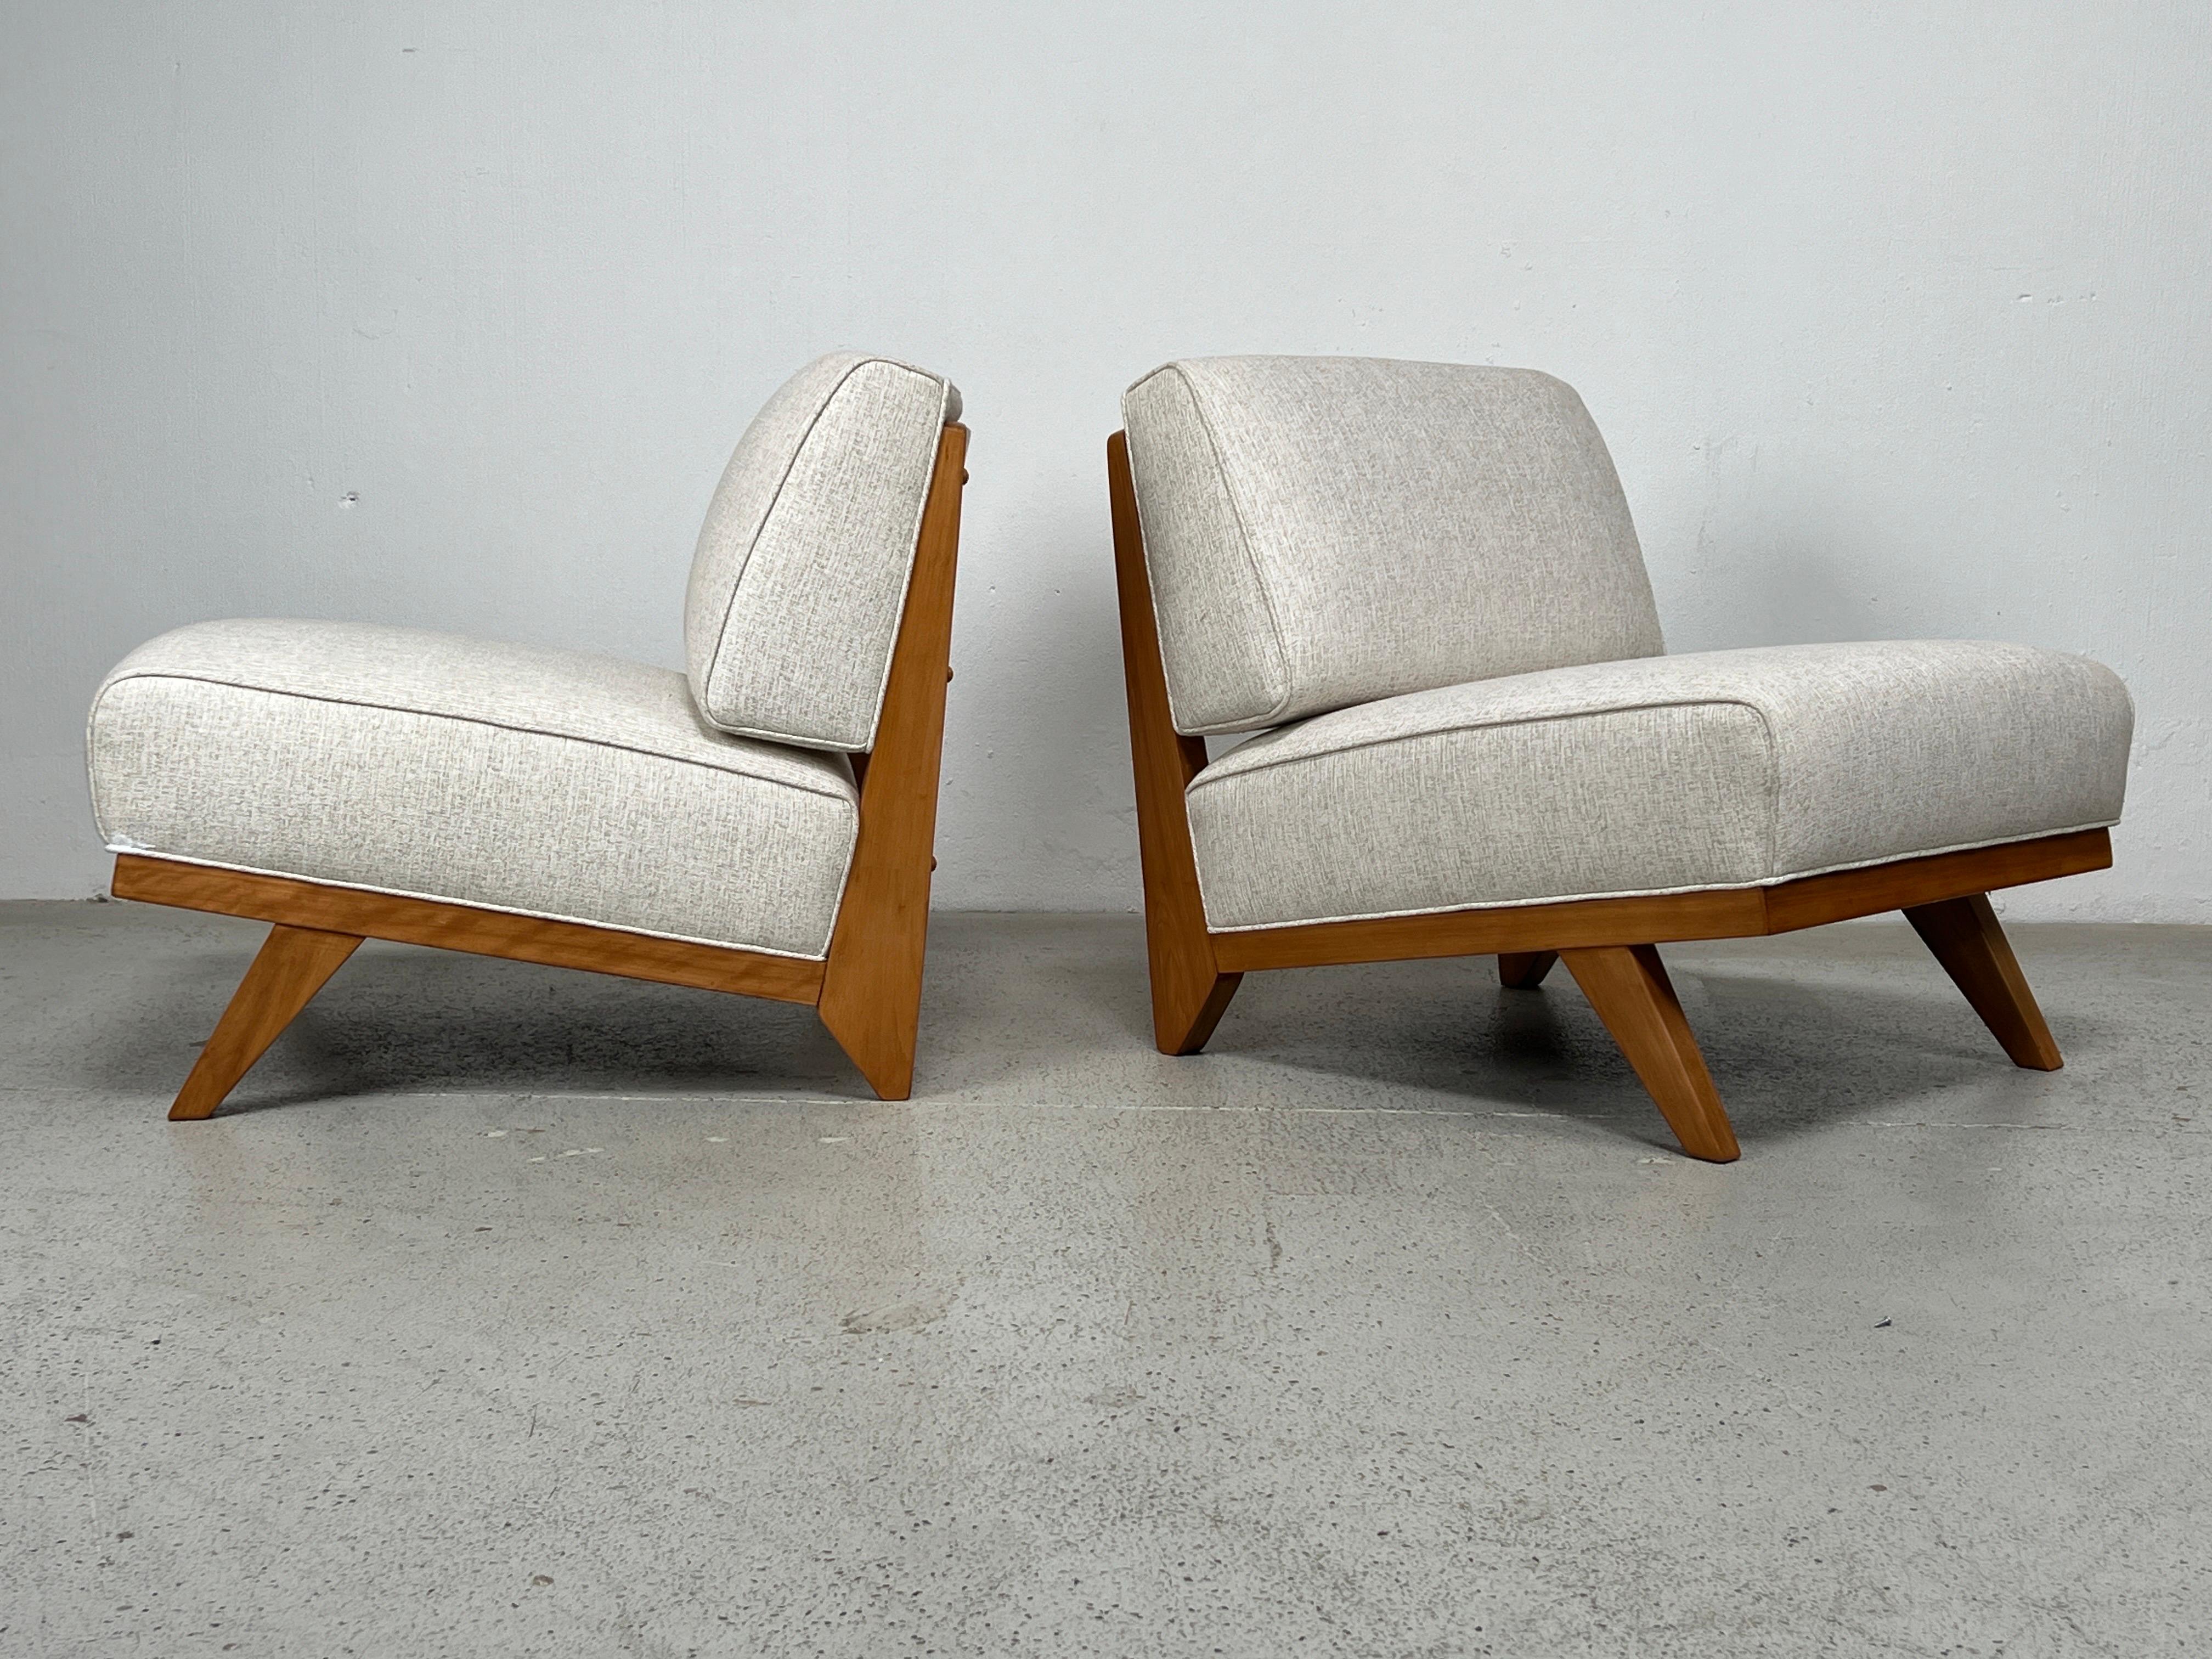 Mid-20th Century Pair of Lounge Chairs by Abel Sorensen for Knoll For Sale